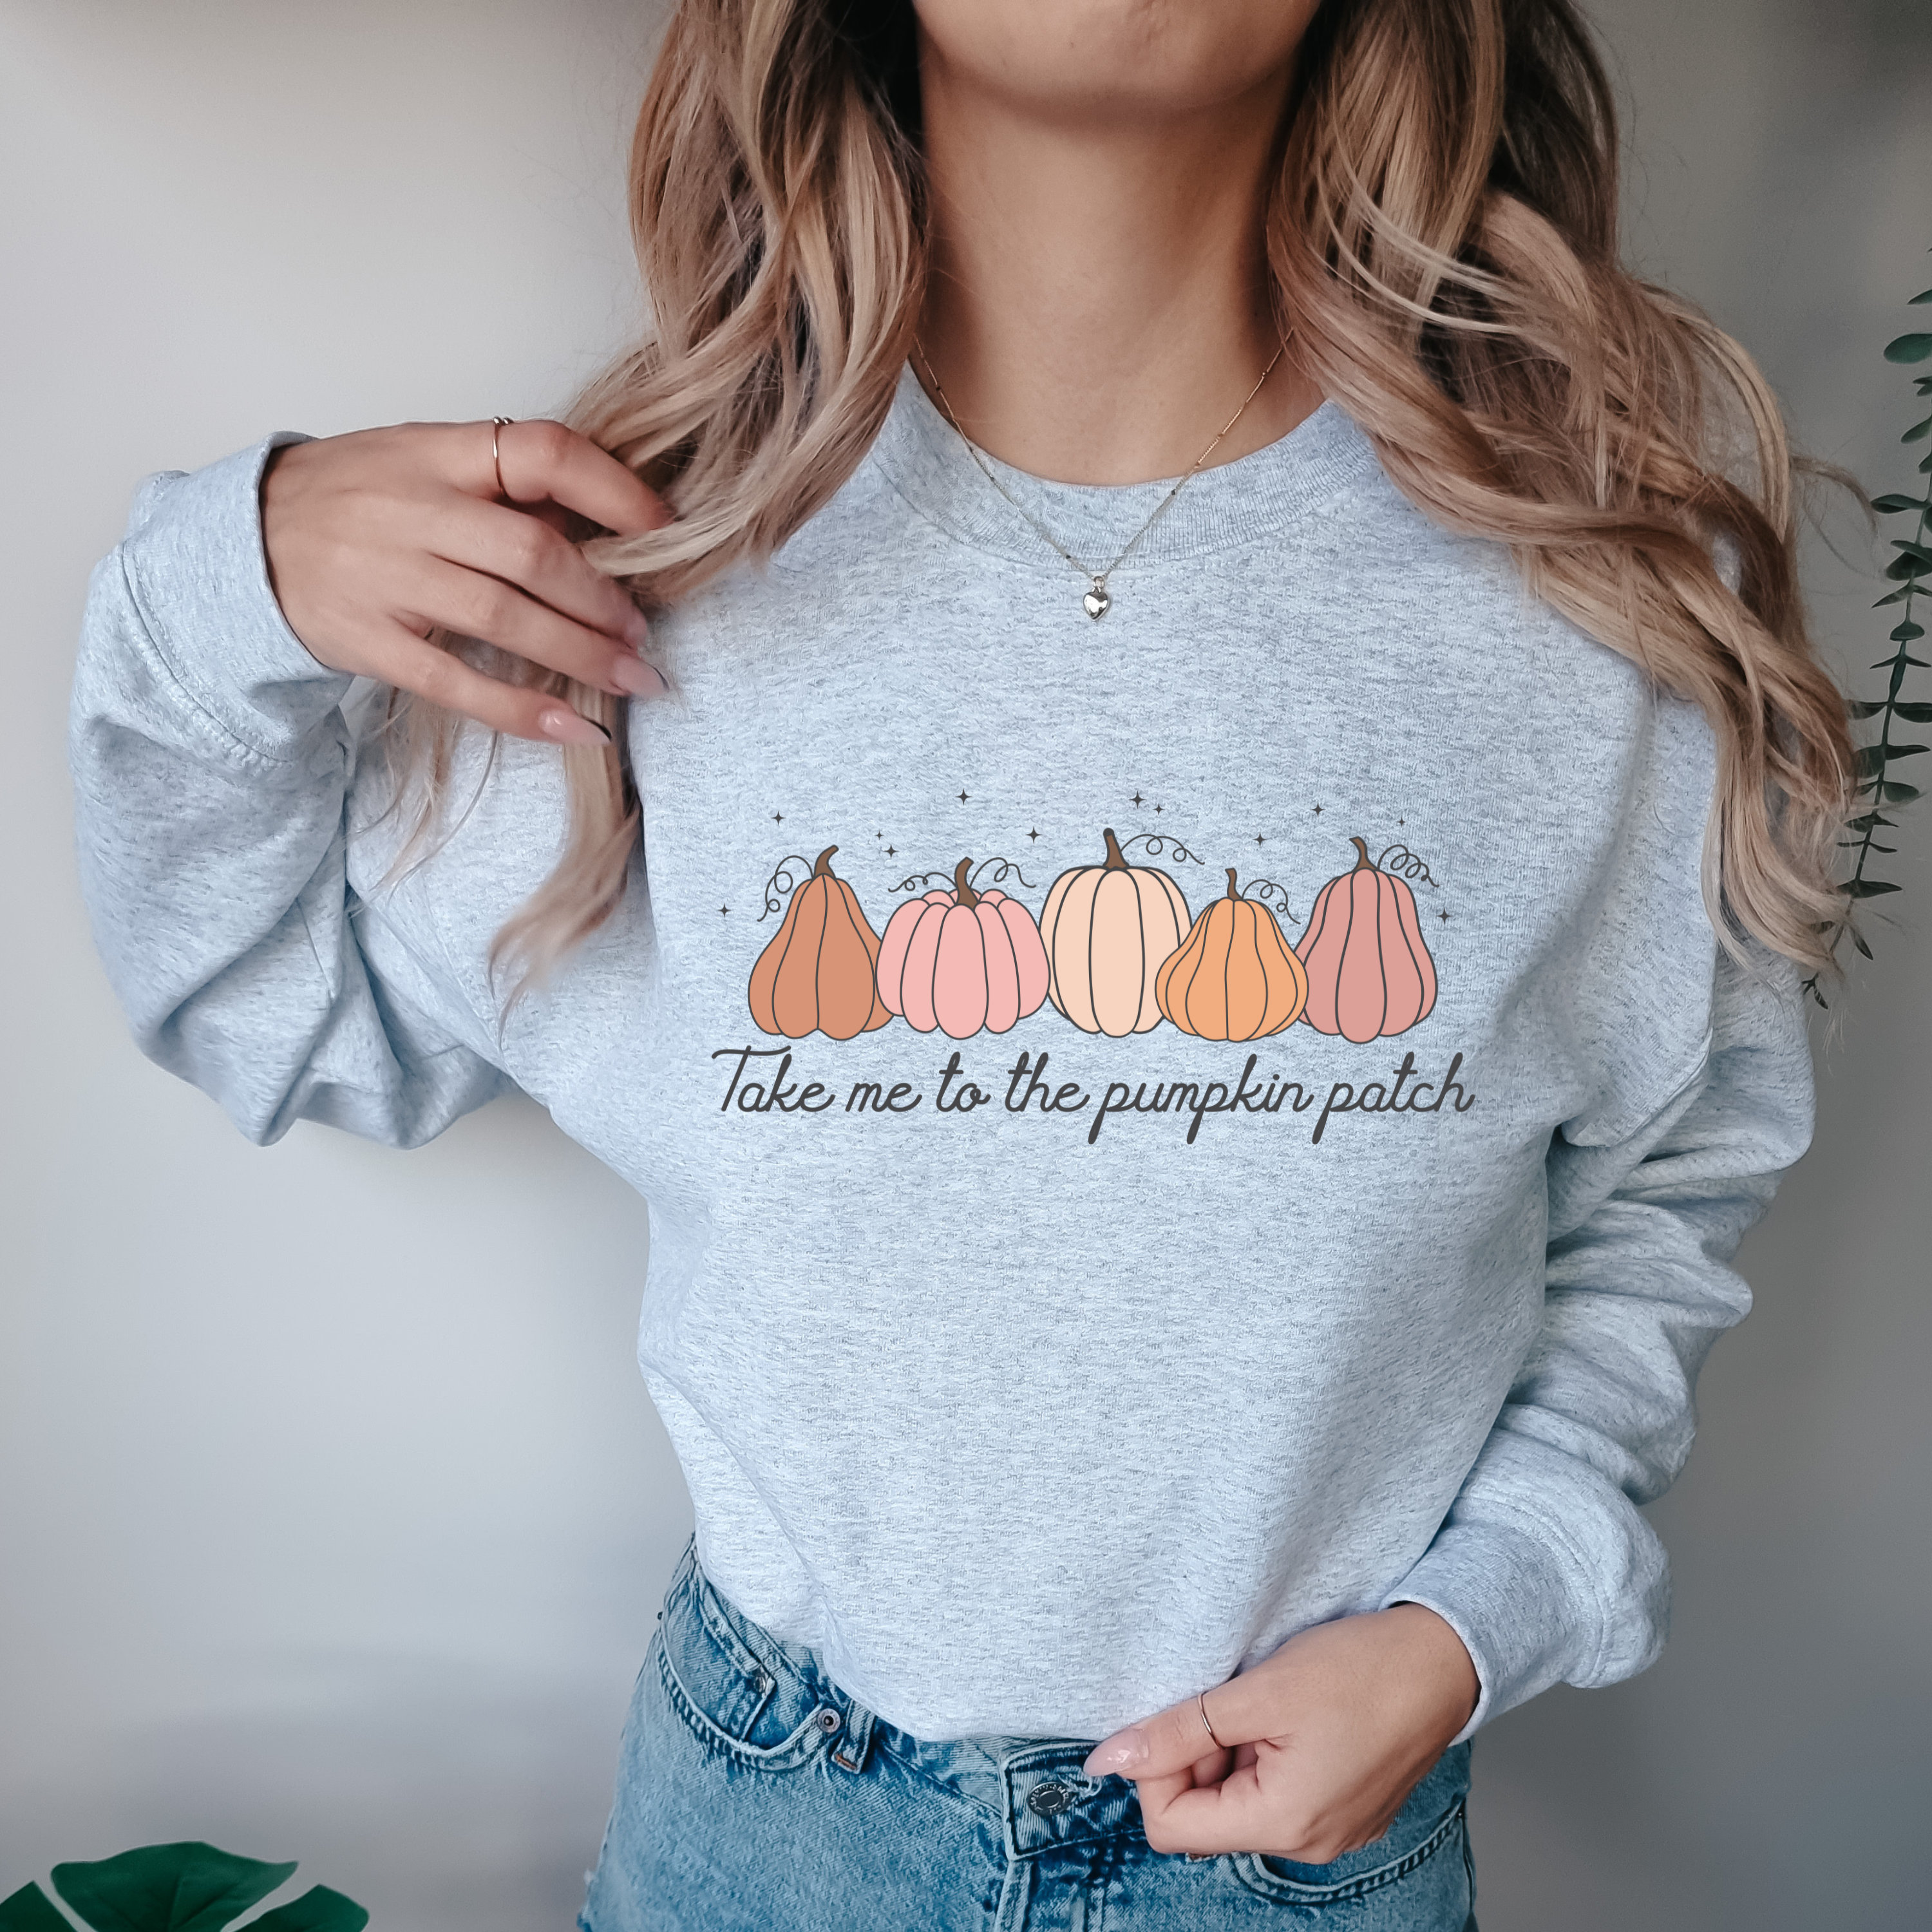 Discover Take Me to the Pumpkin Patch Women's Sweatshirt, Pumpkin Sweatshirt, Women's Fall shirt, Fall Pink and Orange Pumpkin Sweatshirt, Fall Gift